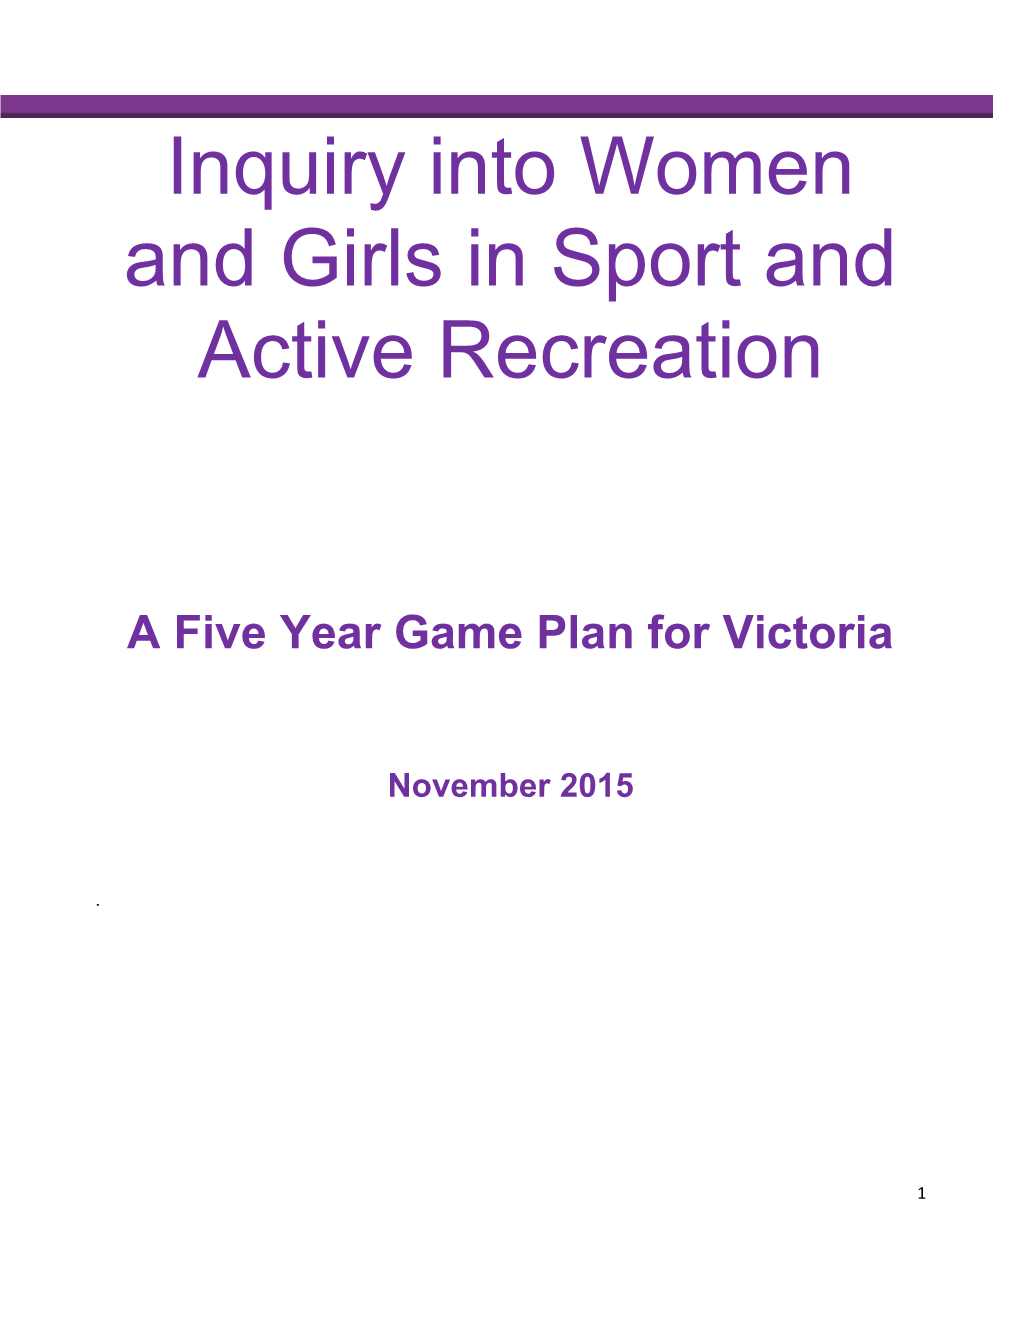 Inquiry Into Women and Girls in Sport and Active Recreation